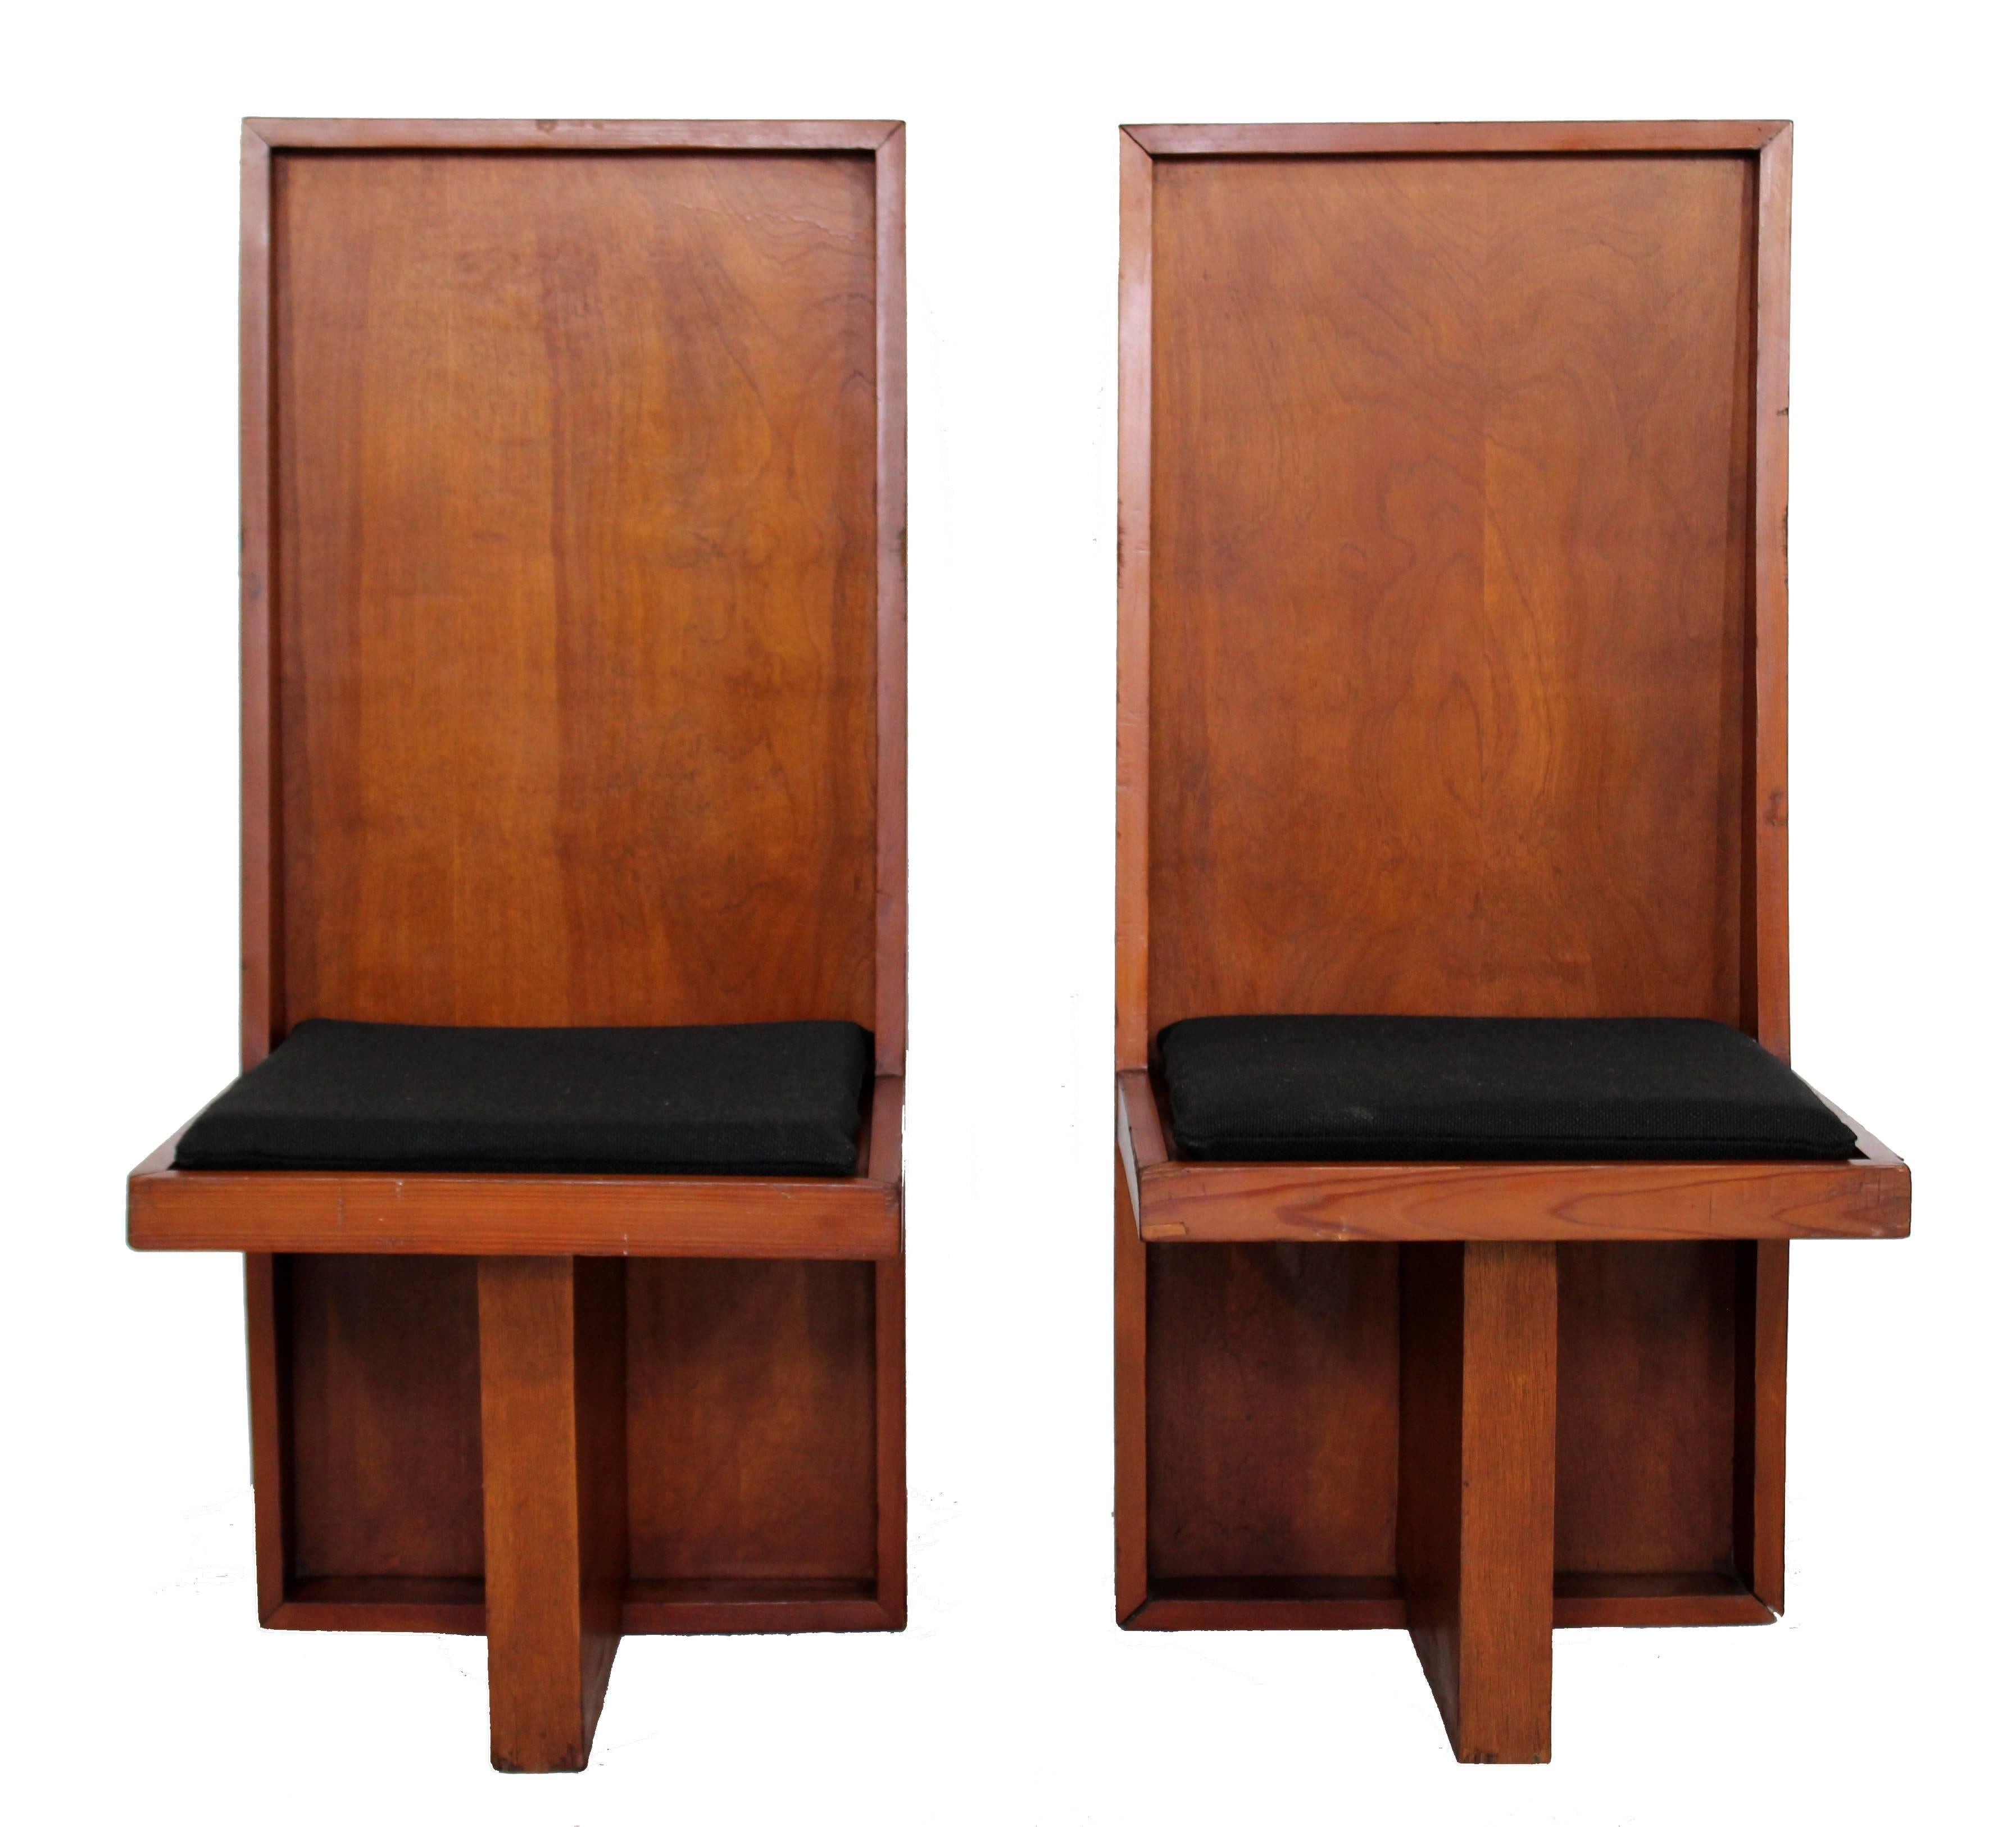 For your consideration is an incredible set of six, high backed, wooden side dining chairs, with unique bases, reminiscent of church pews. Frank Lloyd Wright style. In vintage condition. The dimensions are 17.5